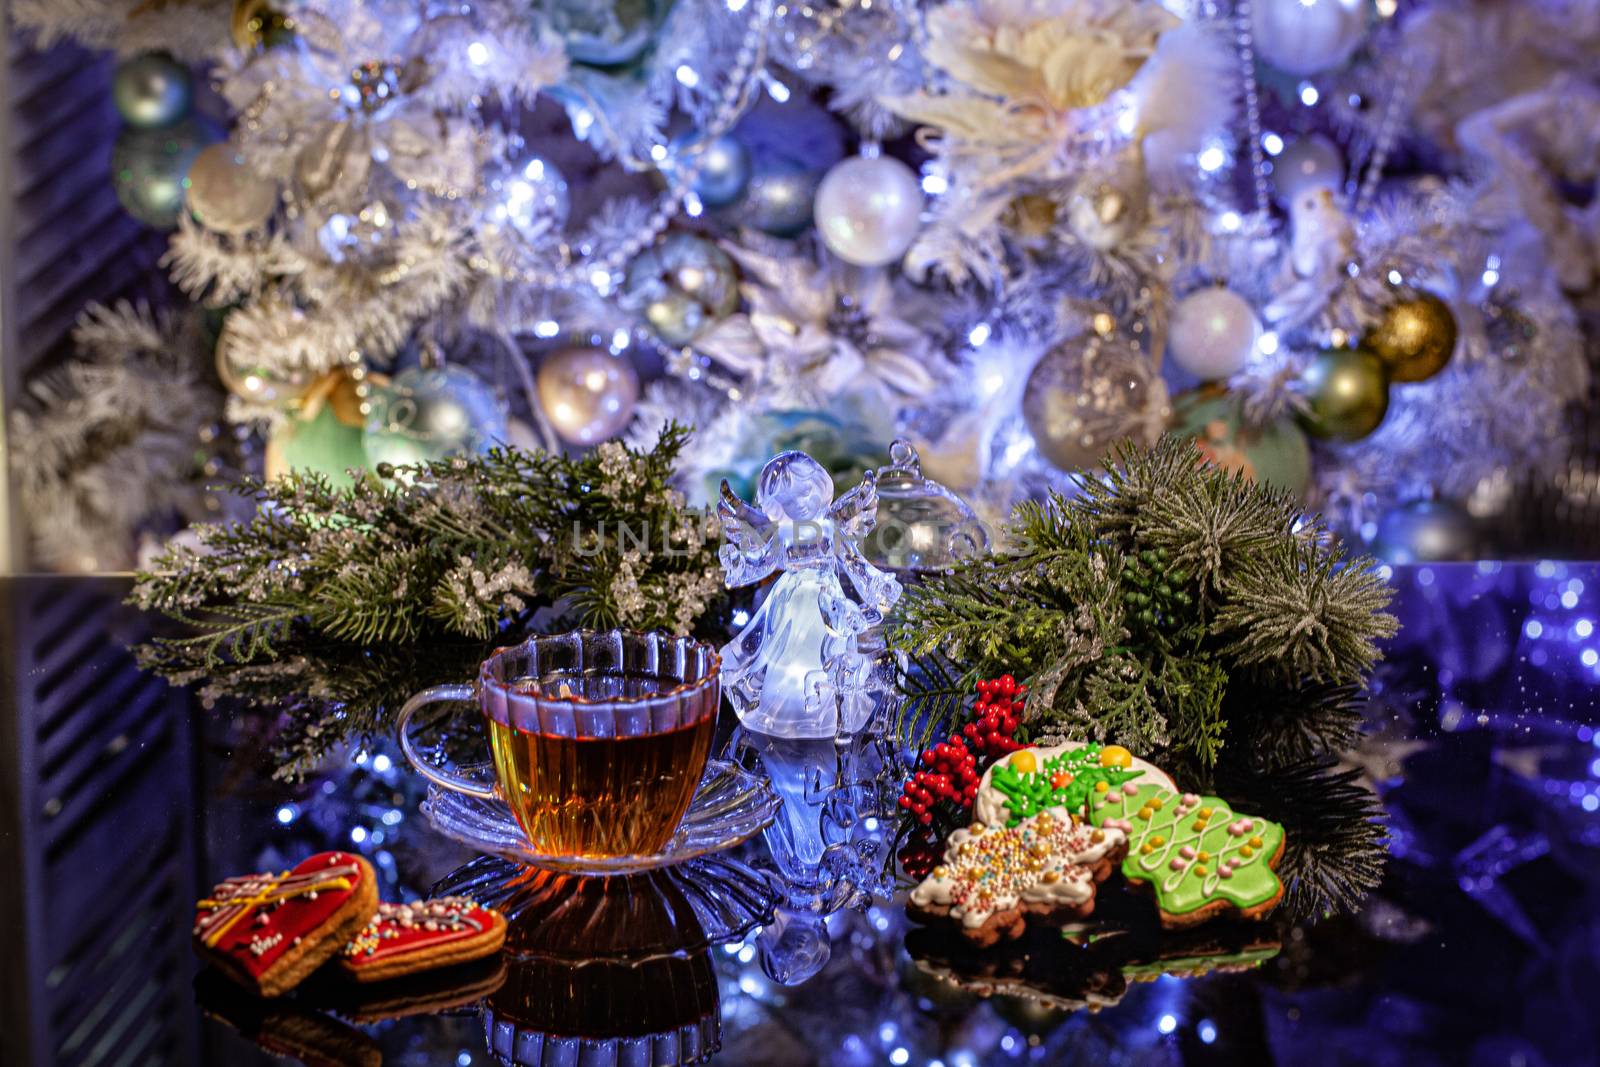 New year tree and food on a glass background